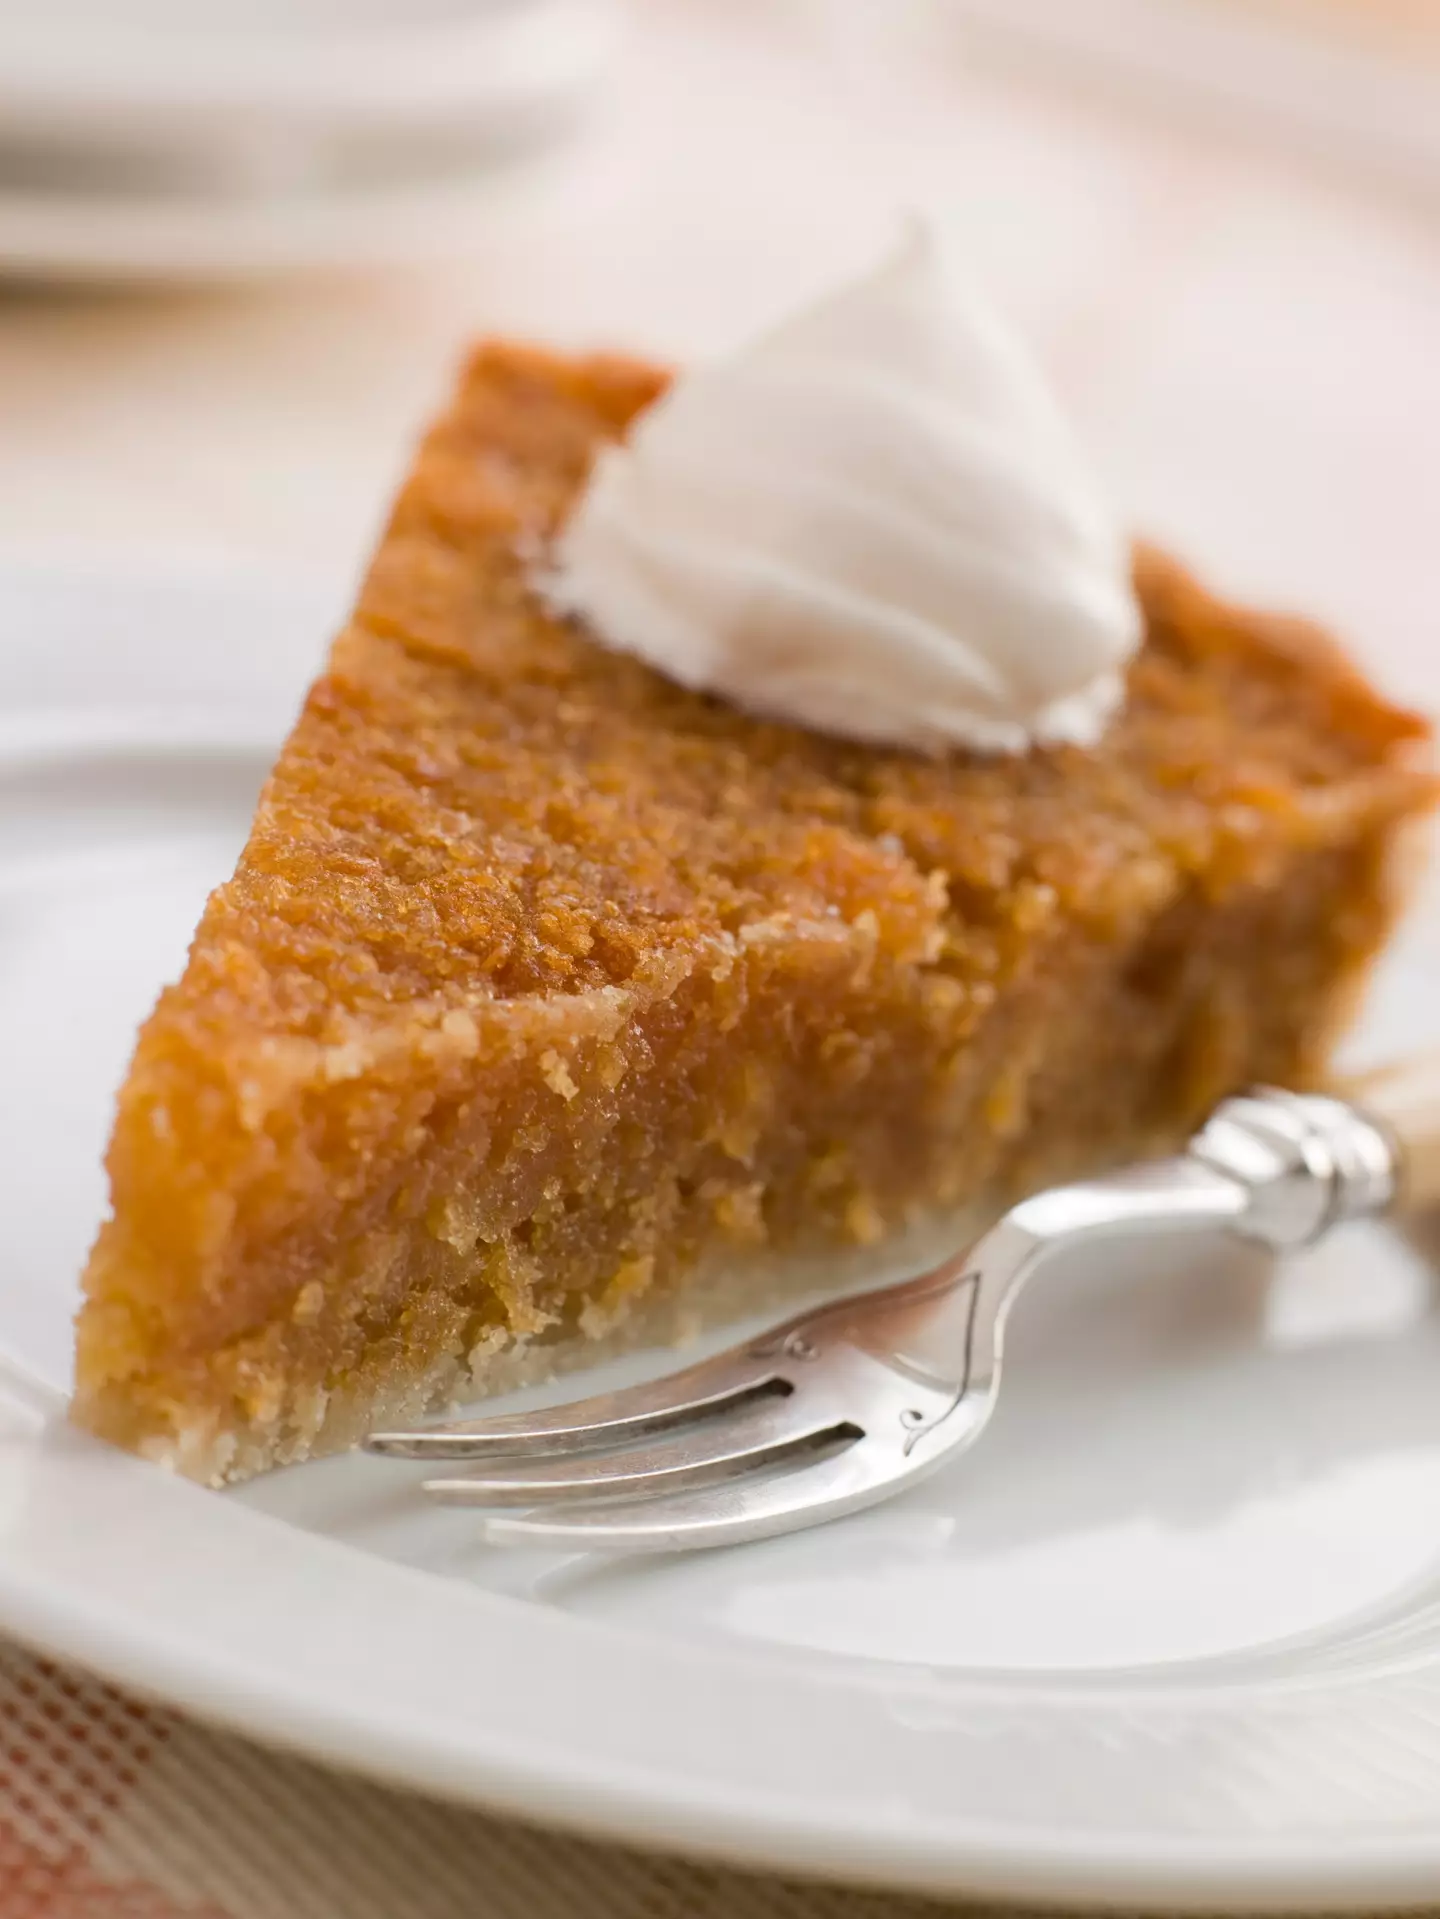 Treacle tart was a favourite of Harry's.